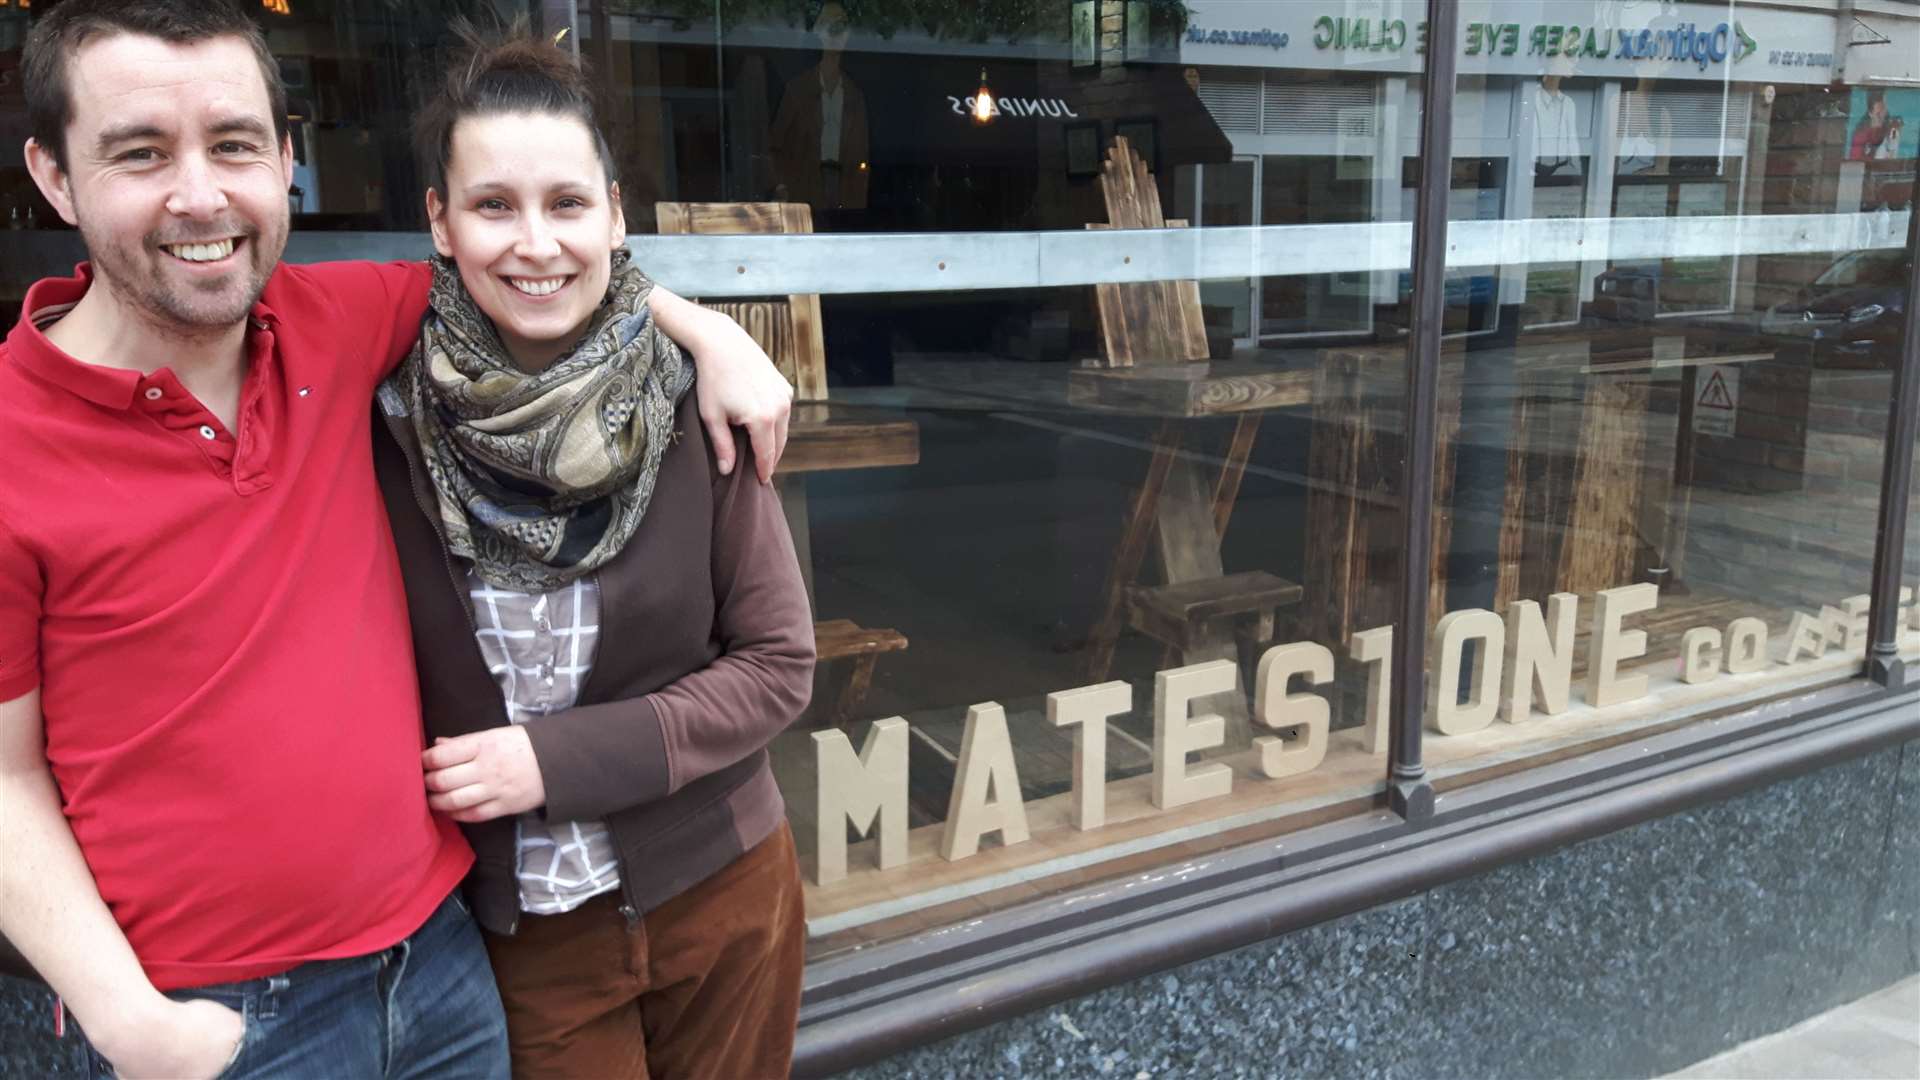 George Spencer and Sandra lemke of Matesones Coffee Bar with their hand-made furniture